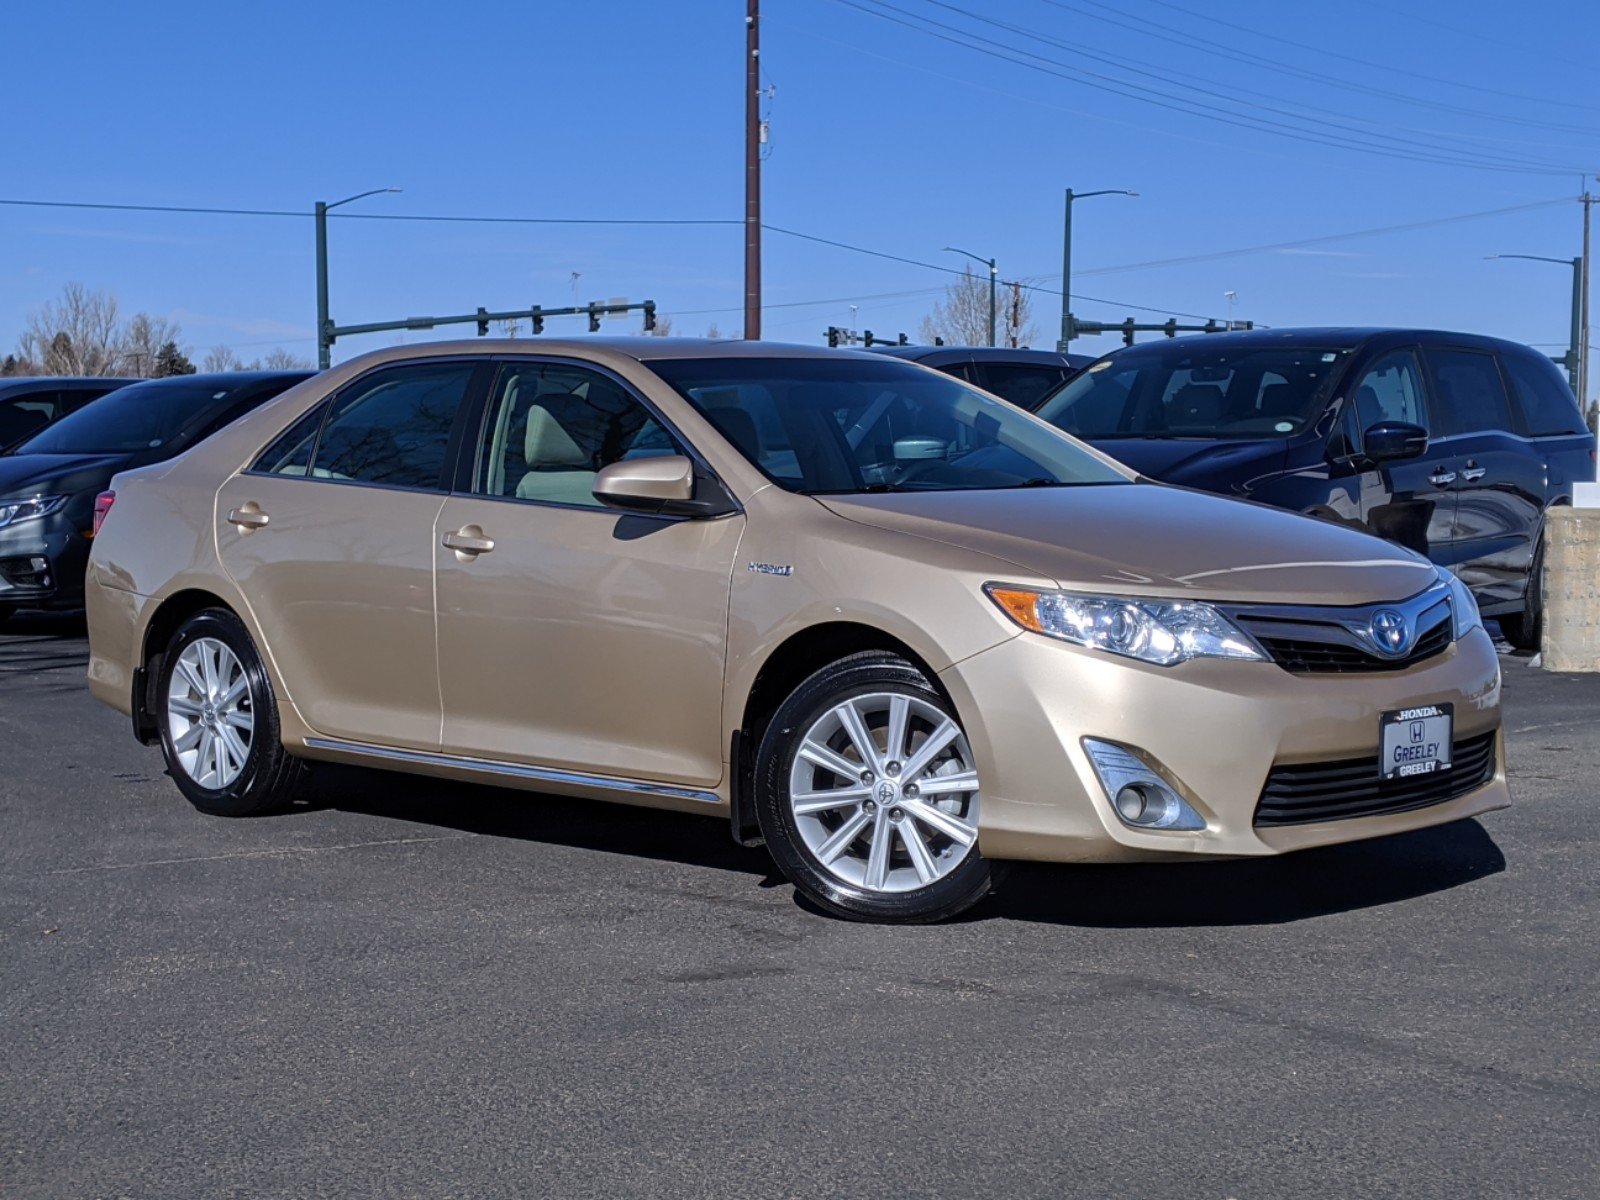 Pre-Owned 2012 Toyota Camry Hybrid XLE 4dr Car in Greeley #19H424C